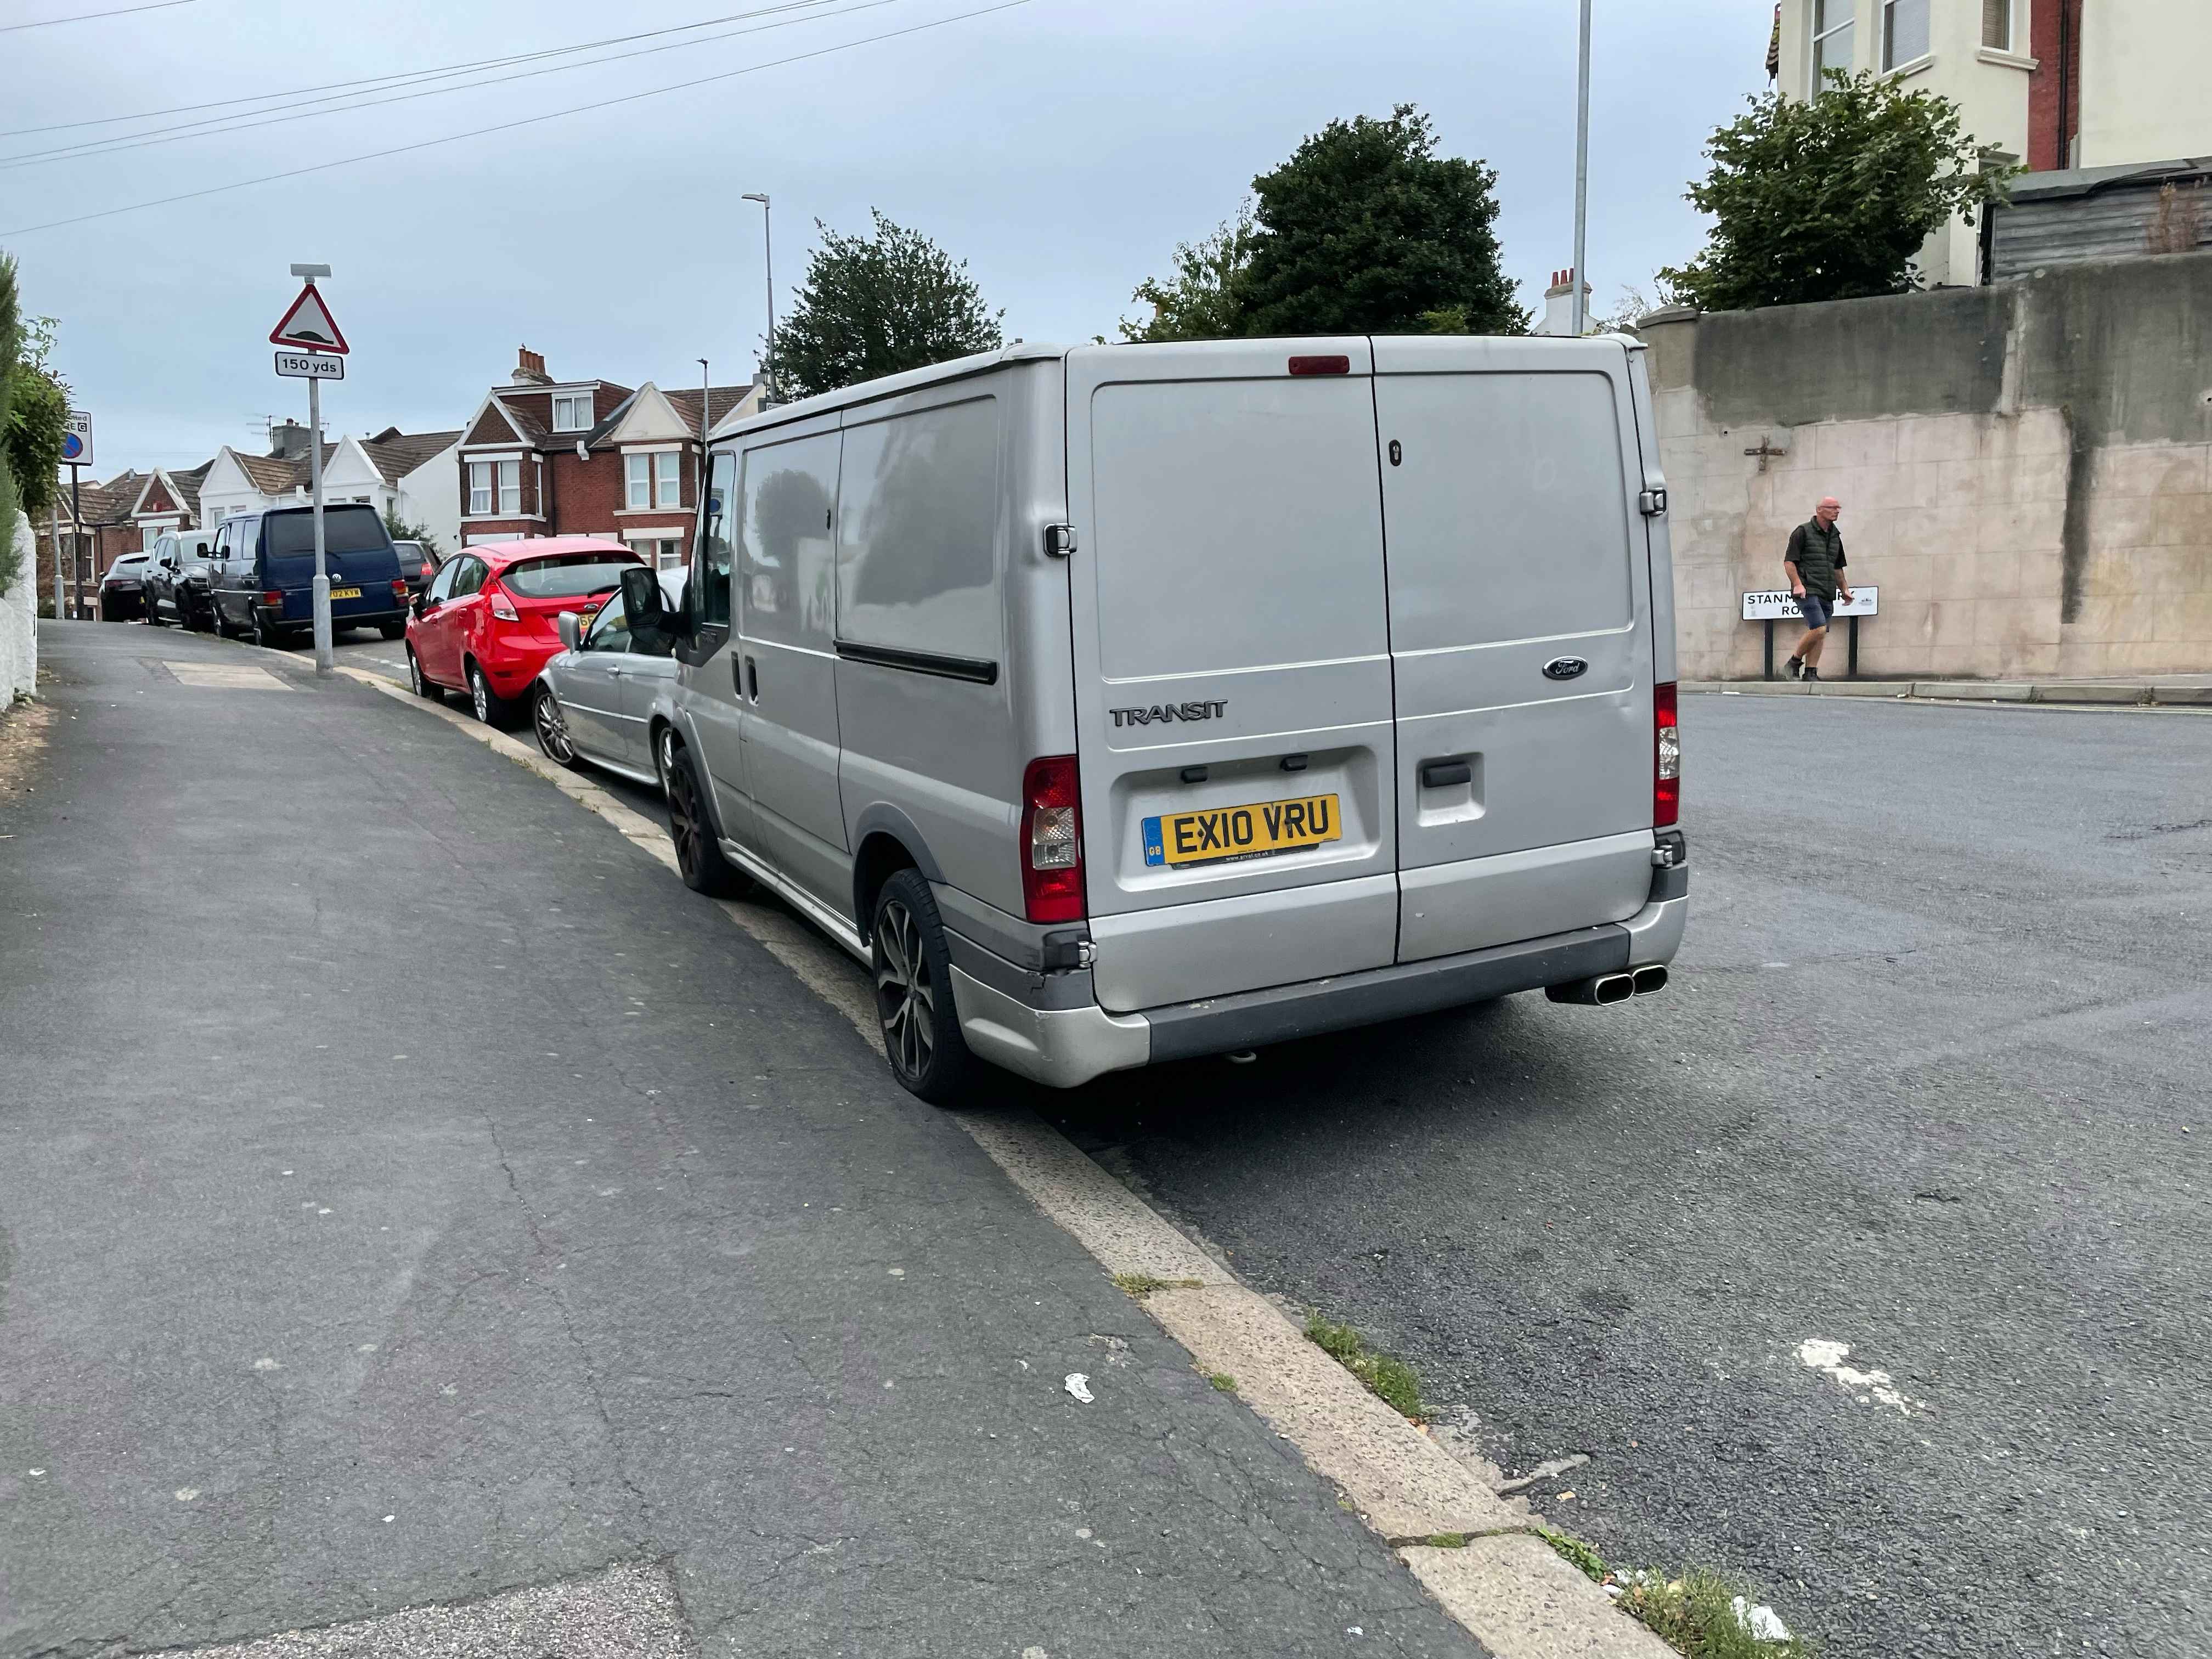 Photograph of EX10 VRU - a Silver Ford Transit parked in Hollingdean by a non-resident. The second of ten photographs supplied by the residents of Hollingdean.